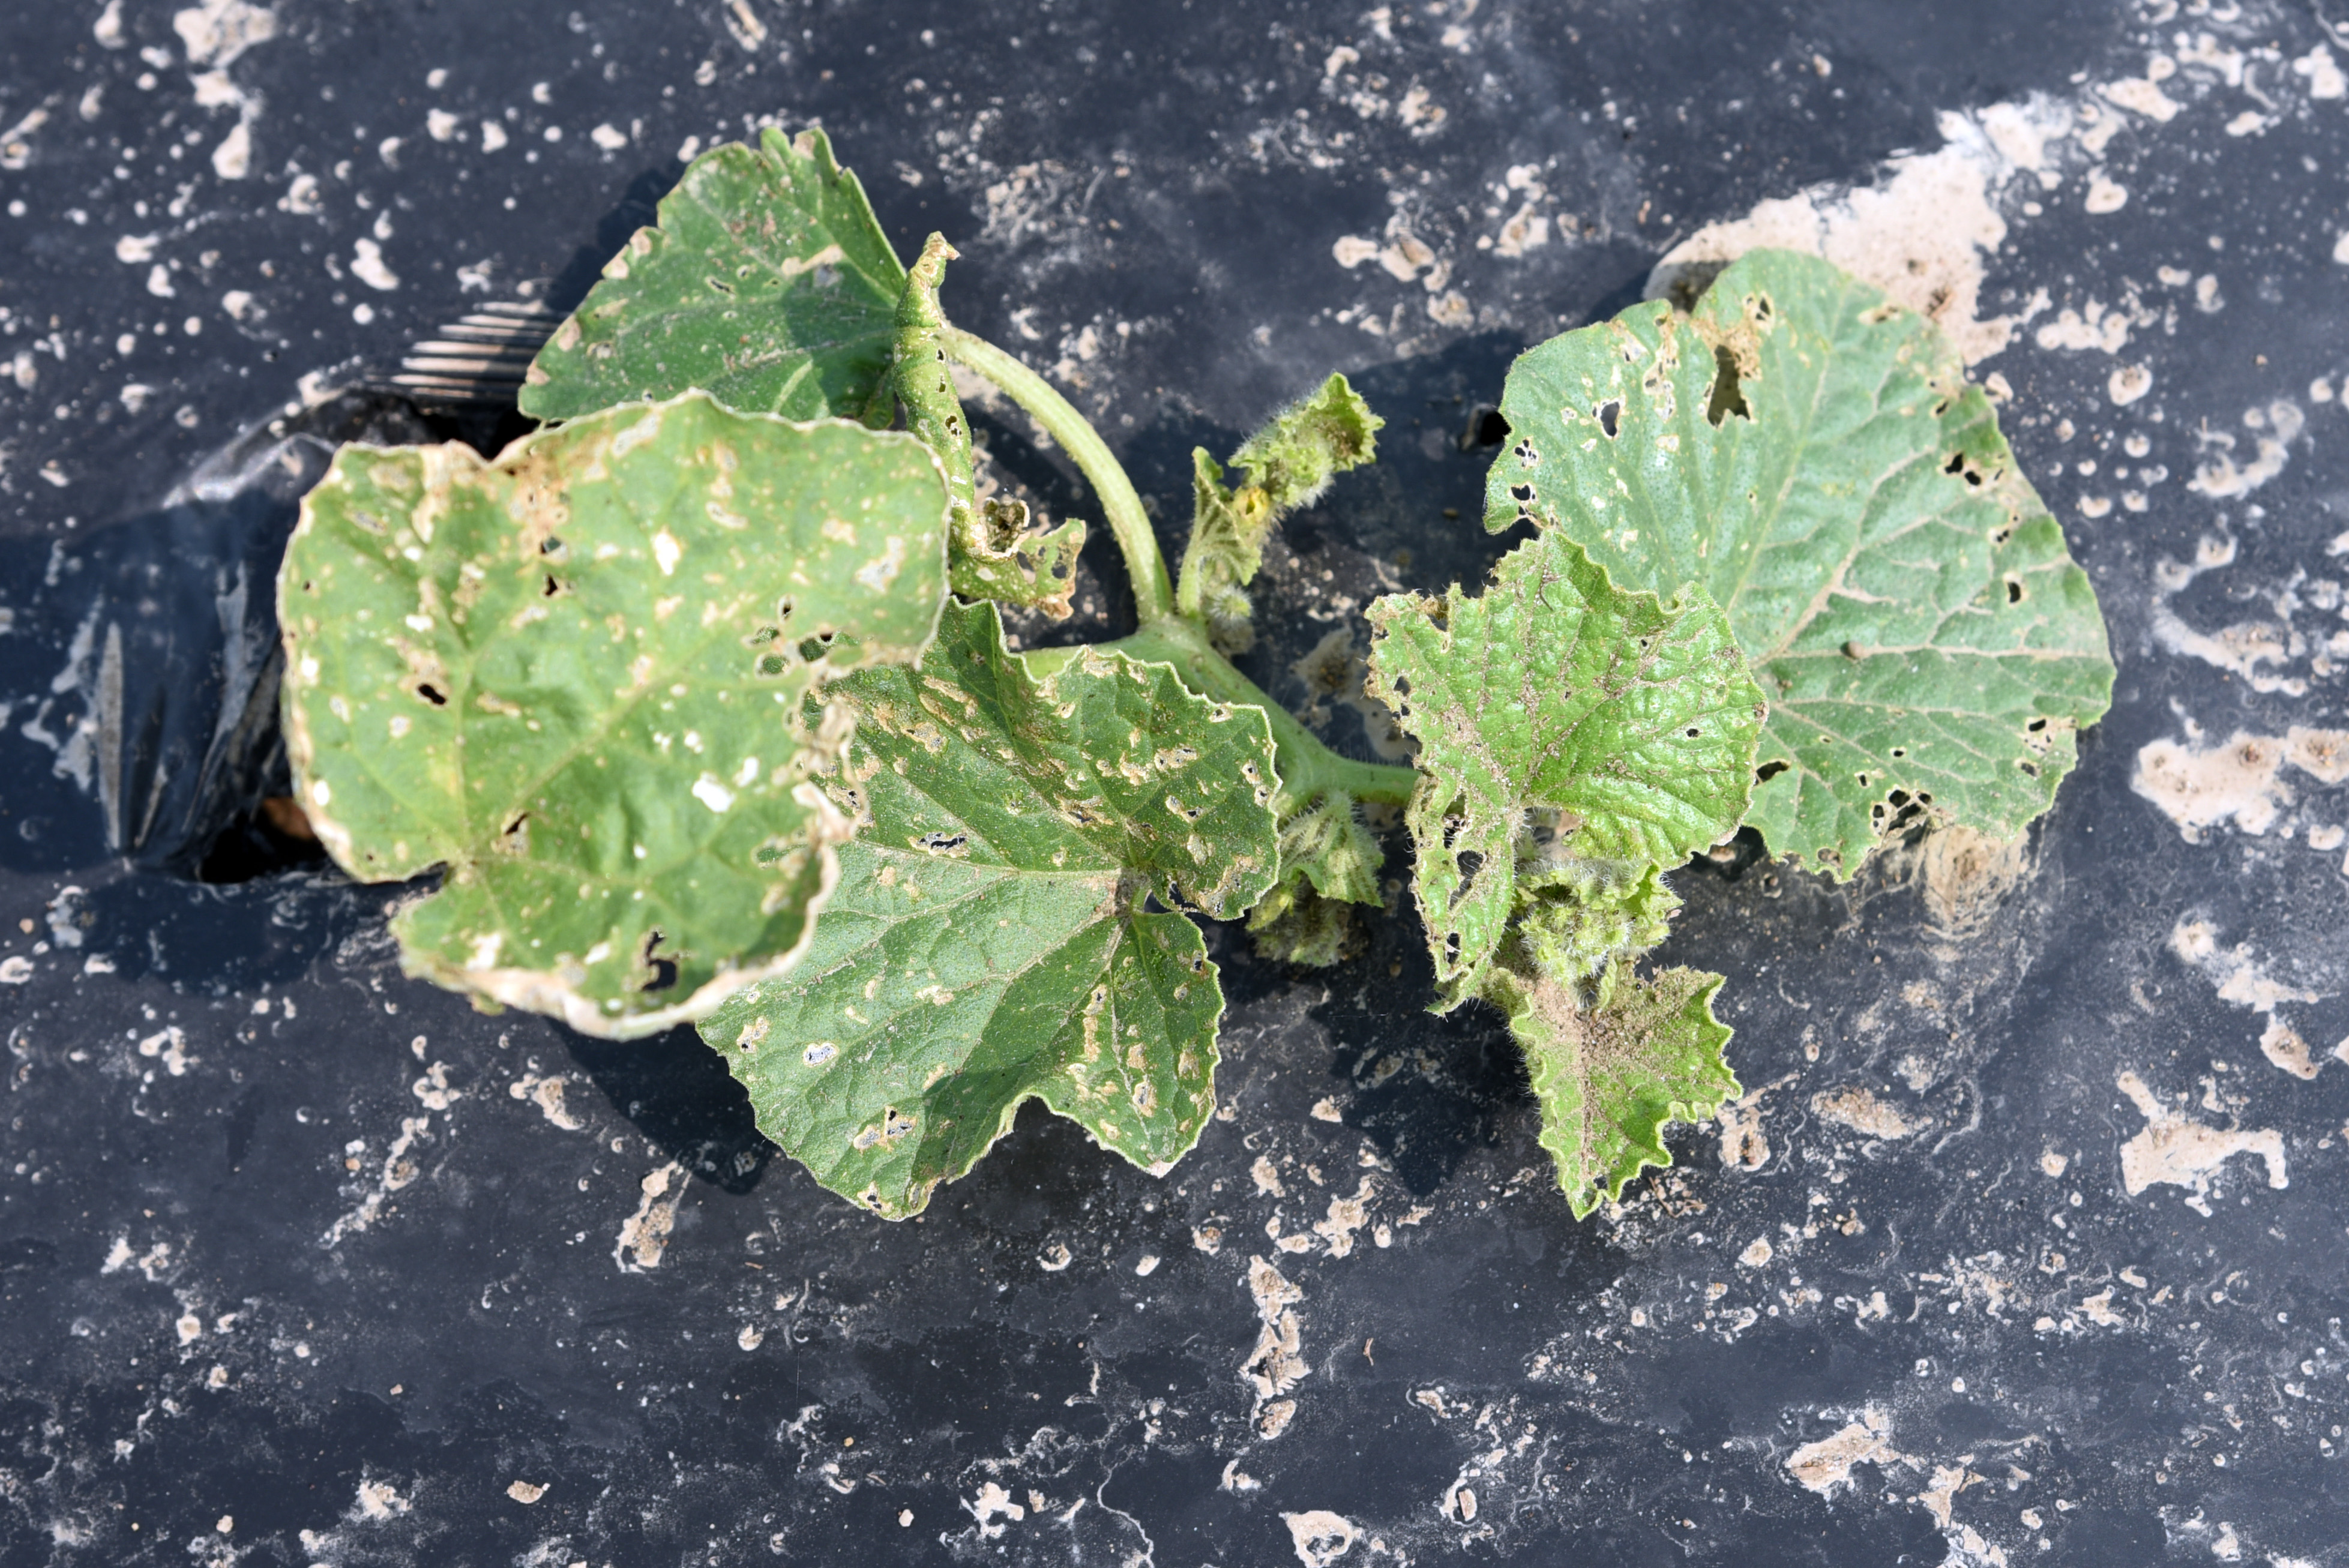 Striped cucumber beetle damage to leaves and fruit